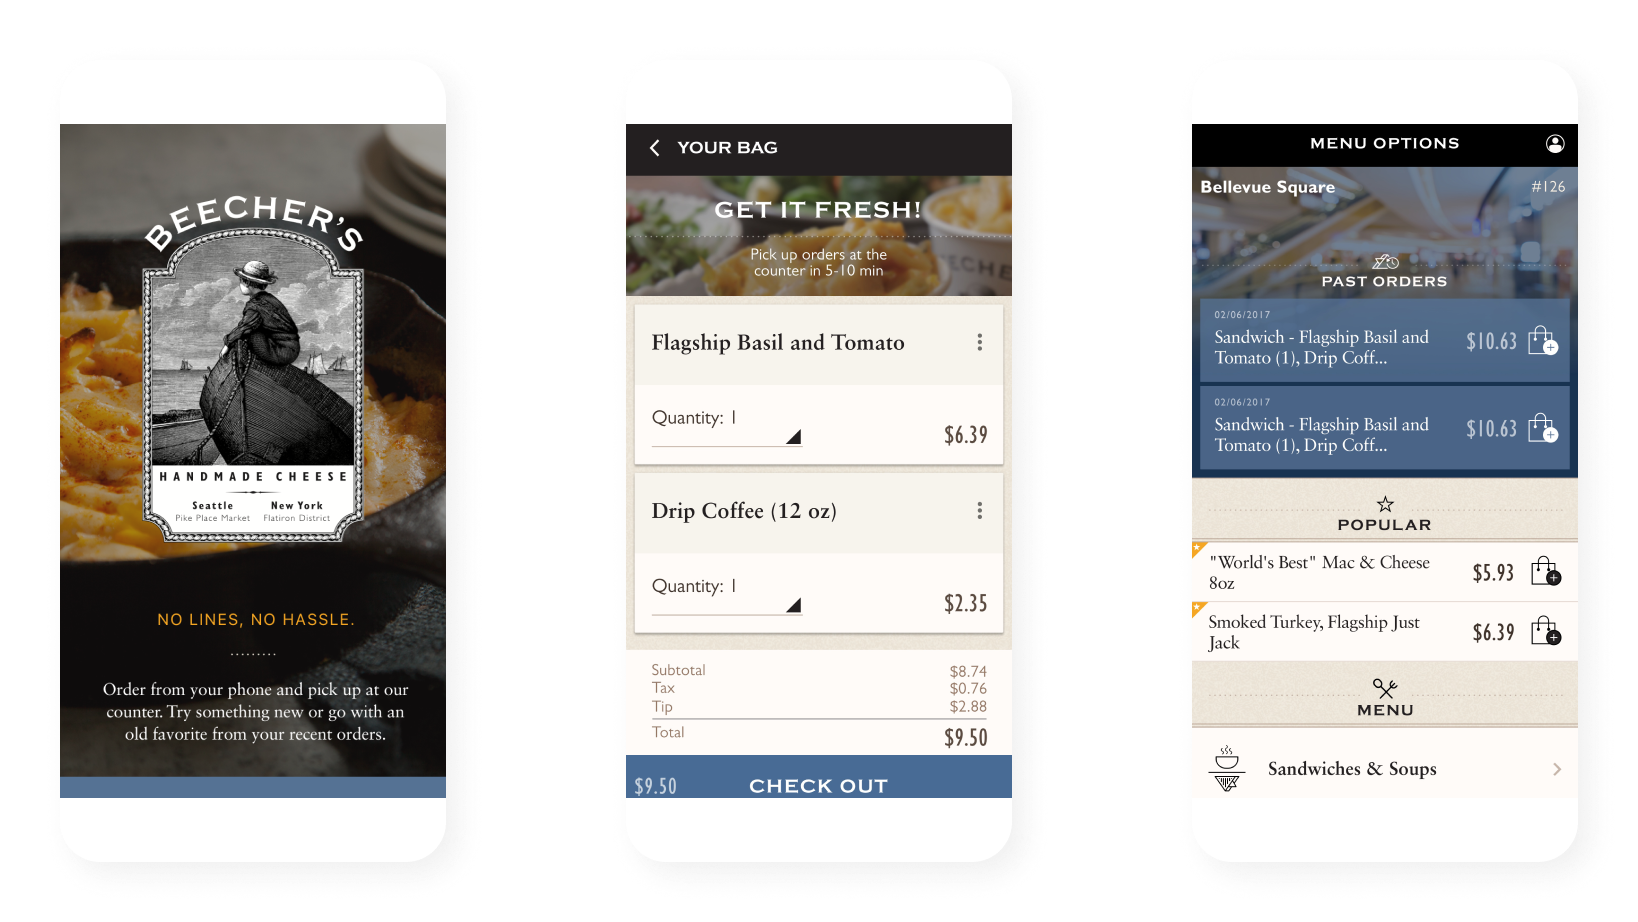 mobile mockup design of checkout page